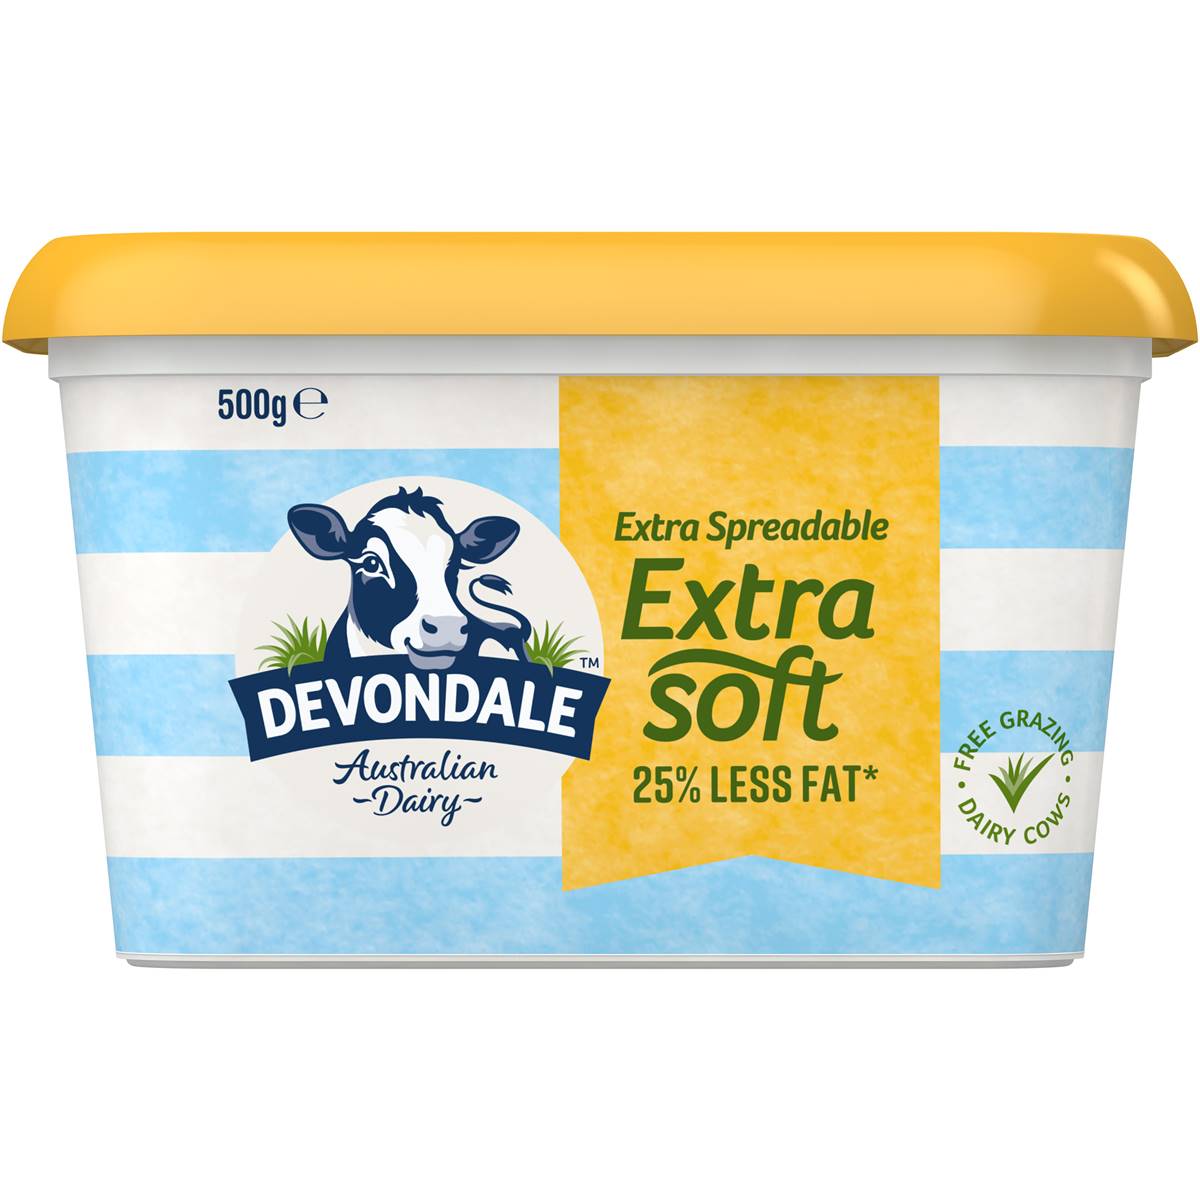 Devondale Dairy EXTRA SOFT  butter  25% Less Fat Butter Tub 500g